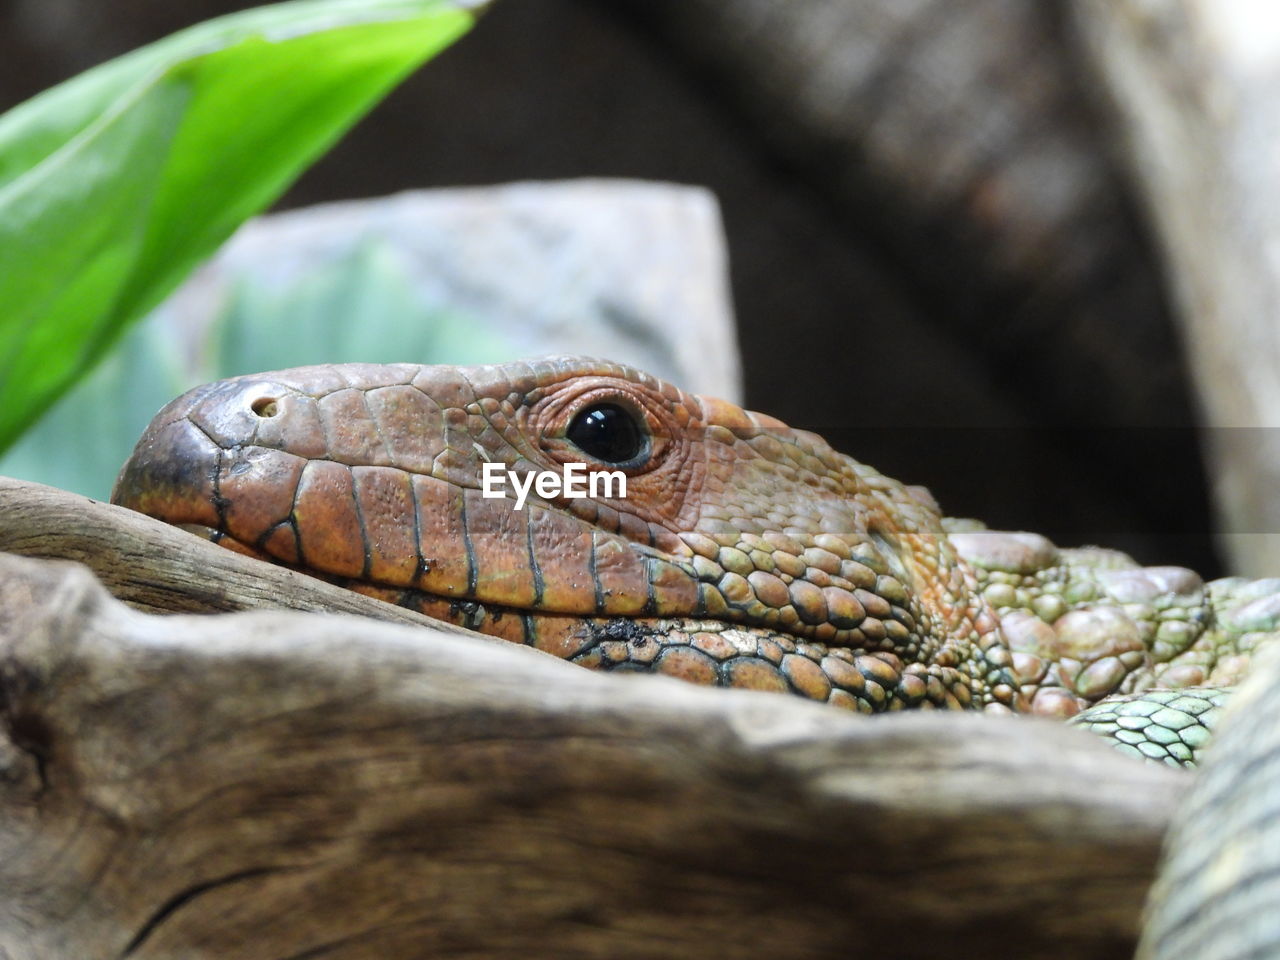 CLOSE-UP OF A REPTILE